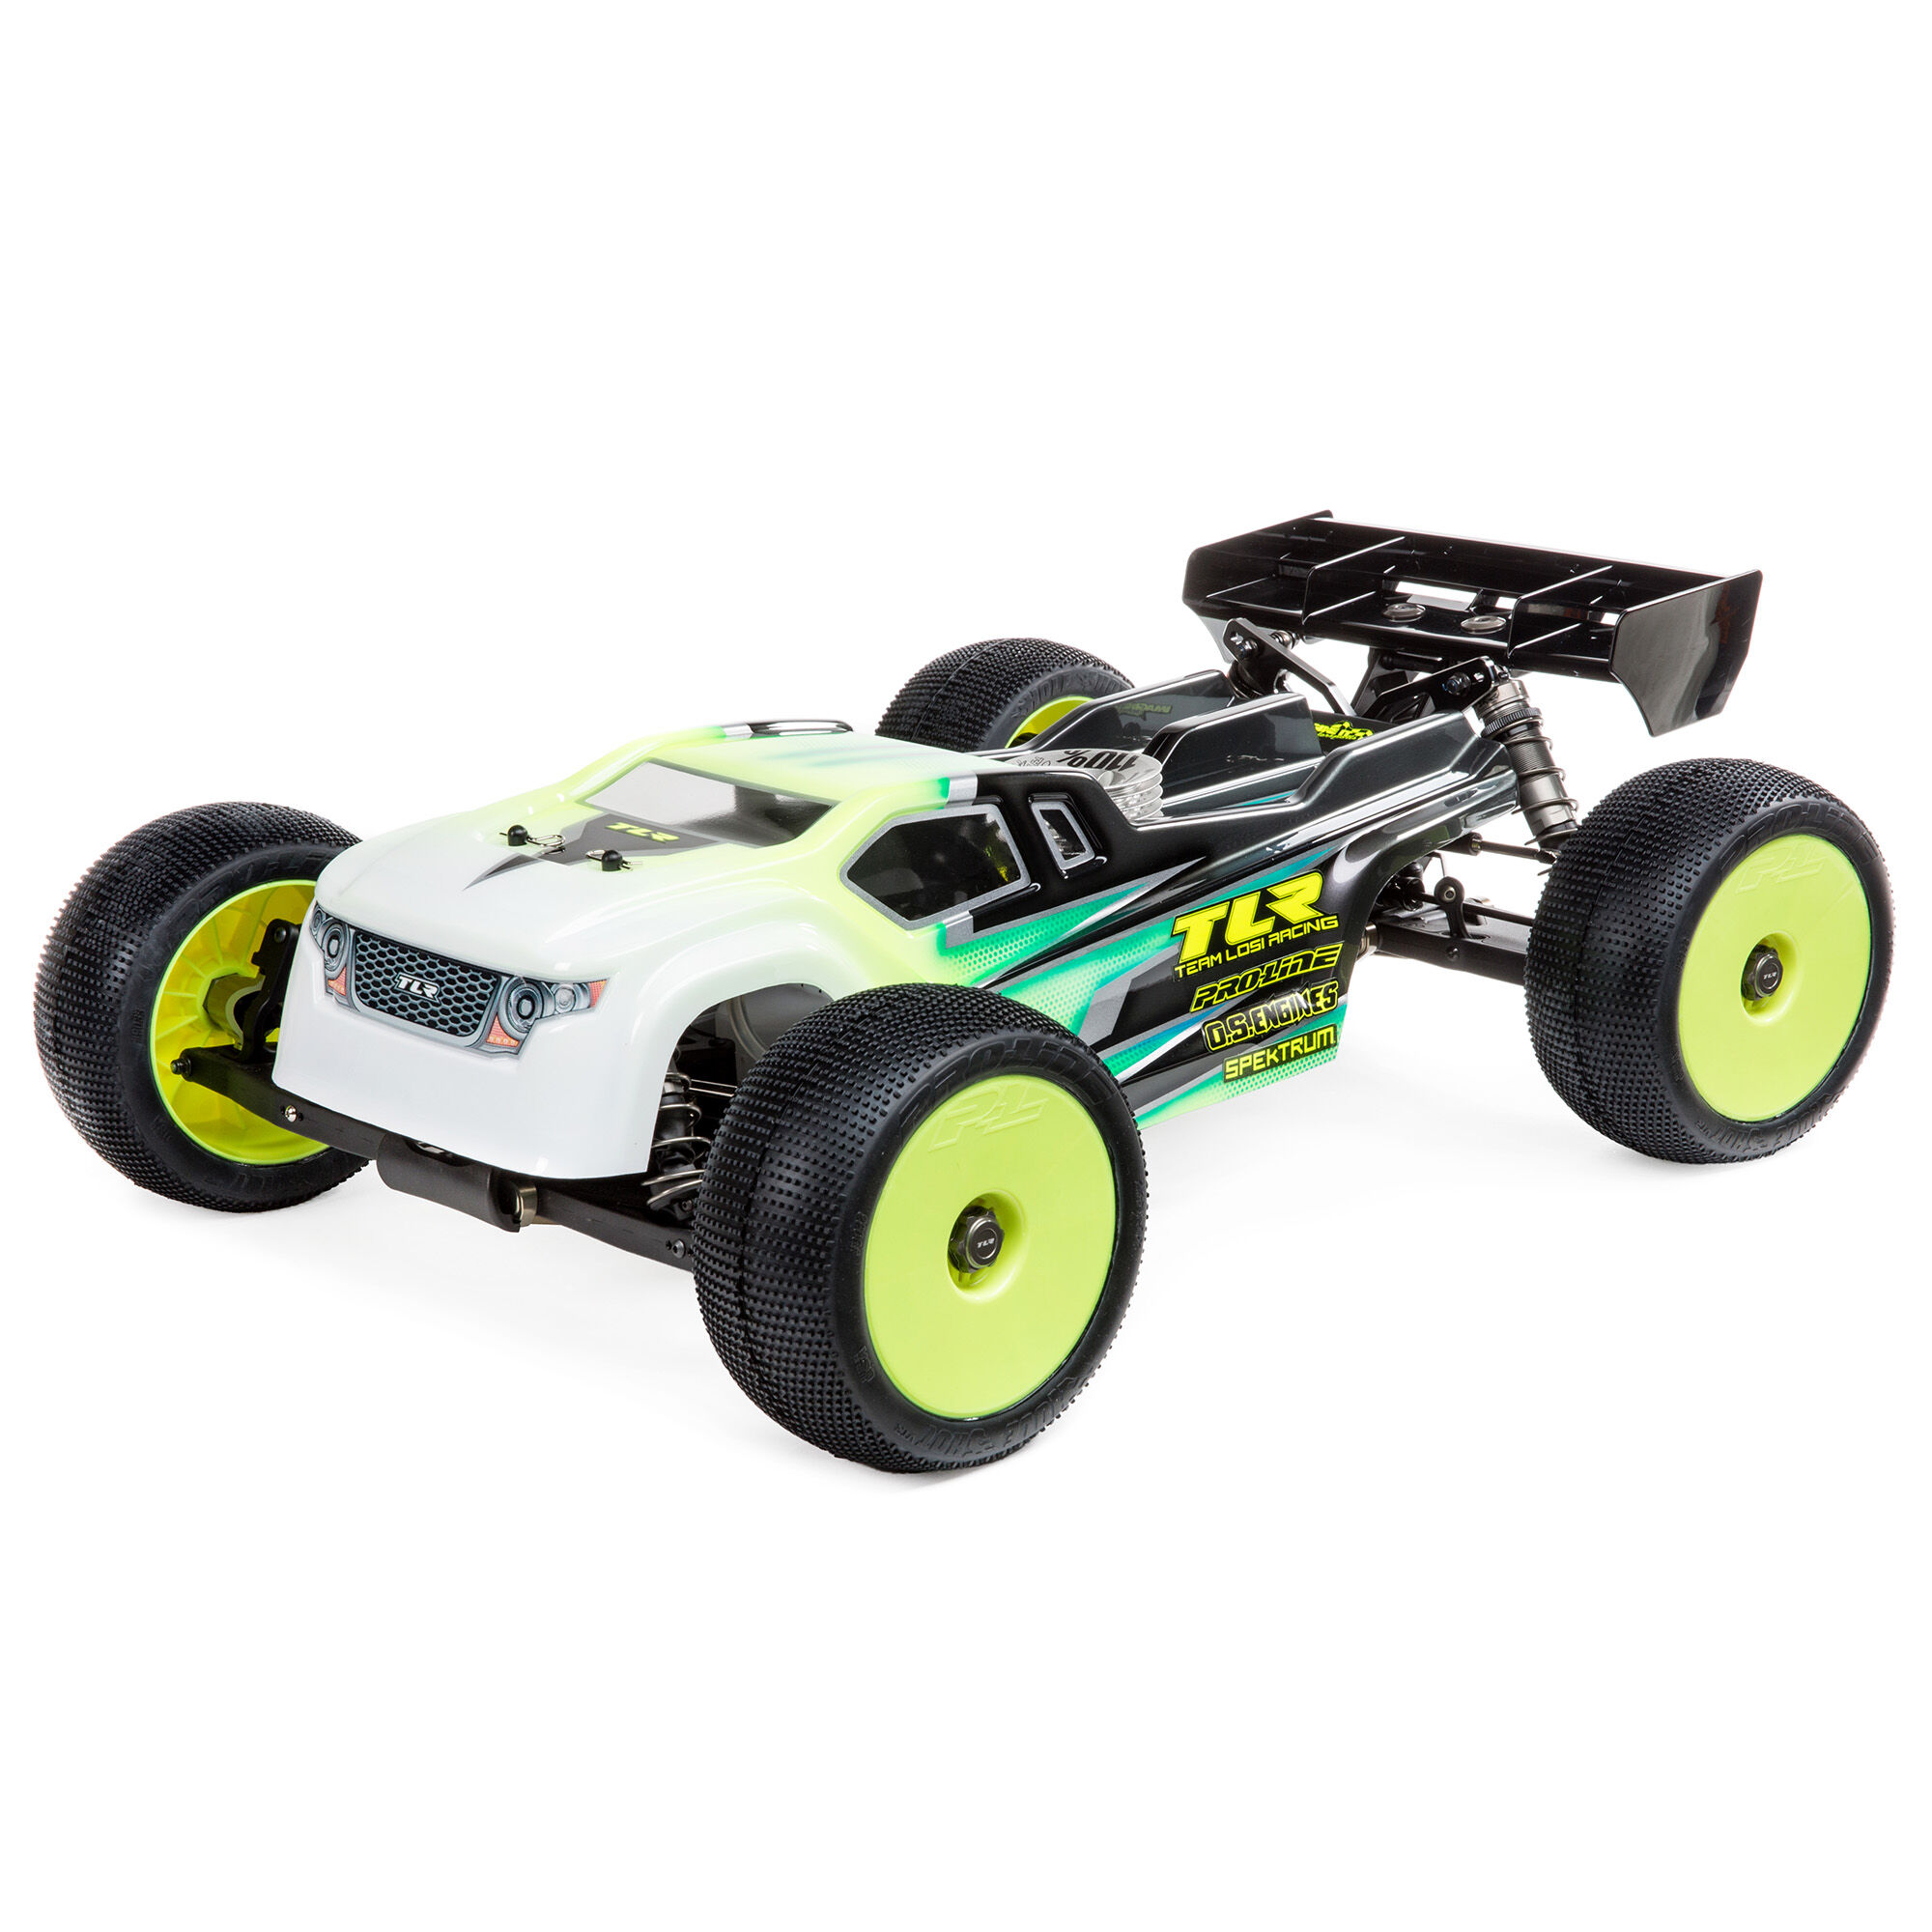 1/8 Scale RC Race Cars | Large Scale RC Race Cars | Team Losi Racing